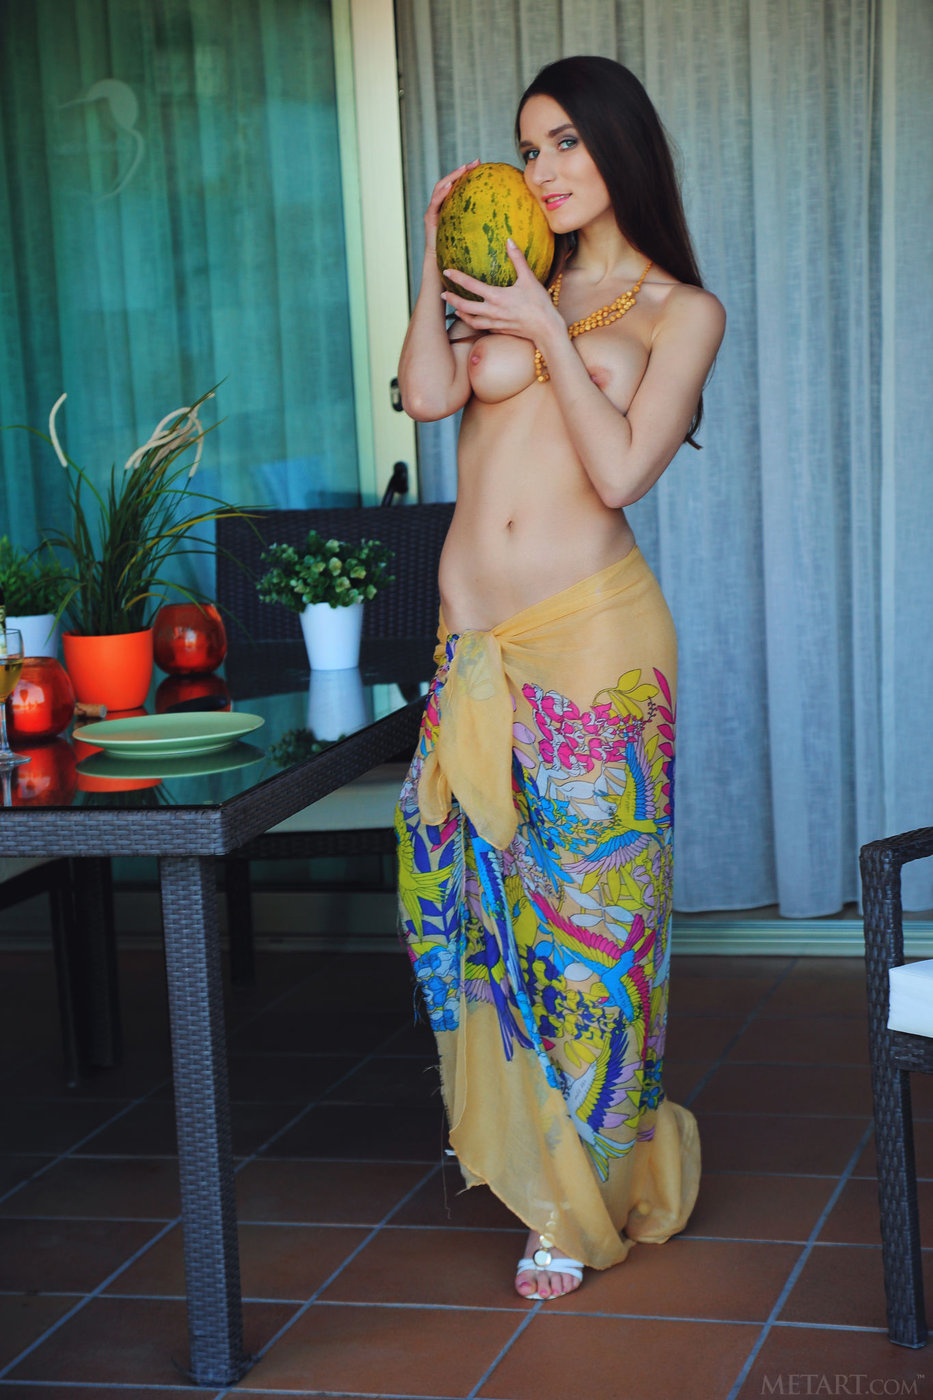 Zuria: Topless sarong-wearing beauty suggestively fingering the fruit.